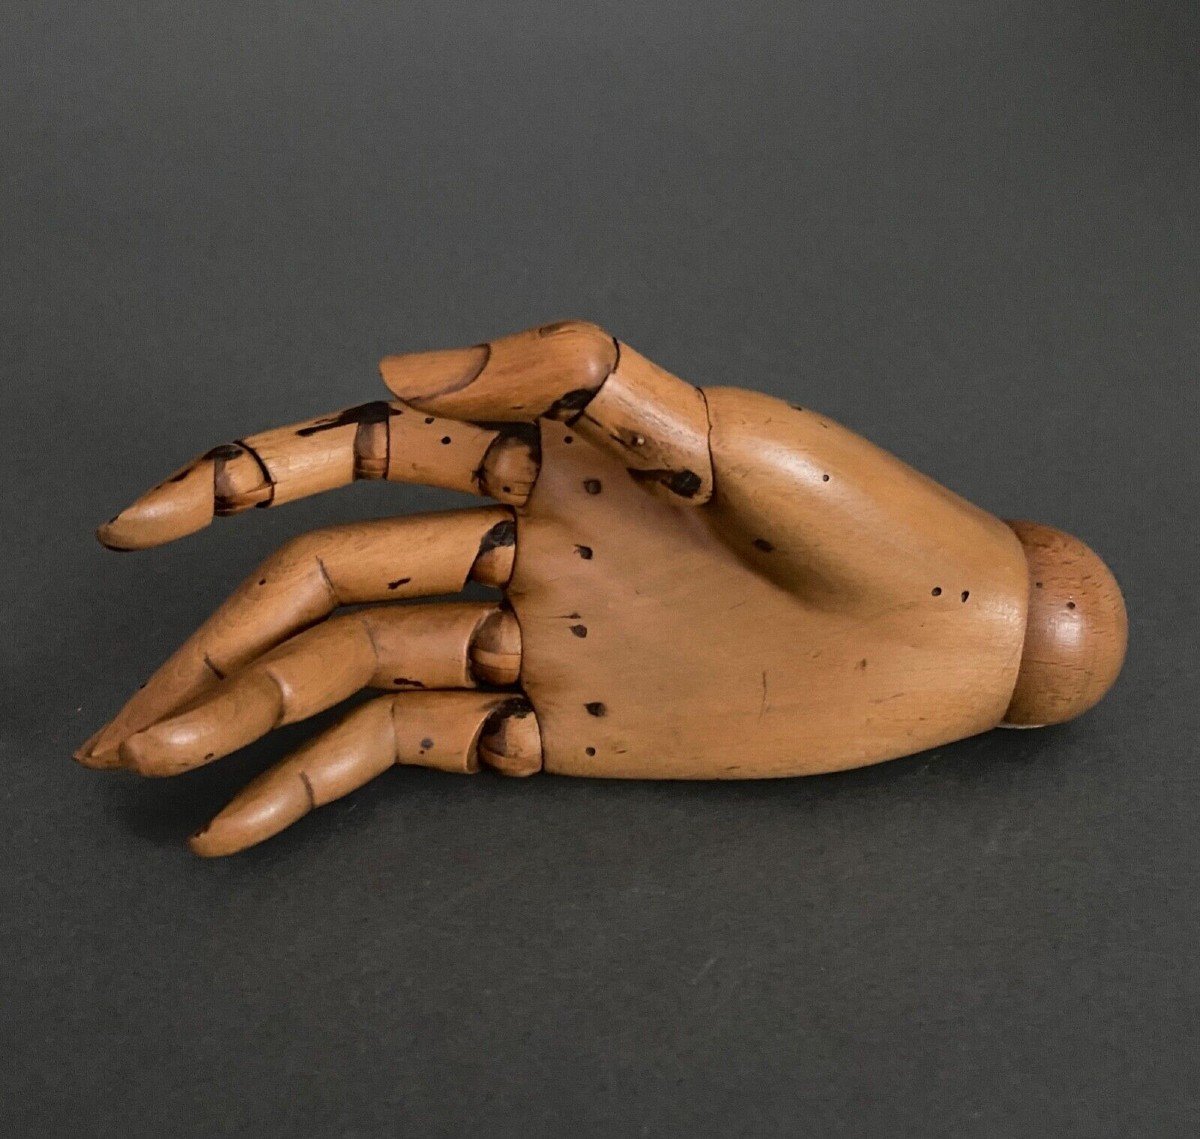 Articulated Wooden Painter's Hand, Early 20th Century